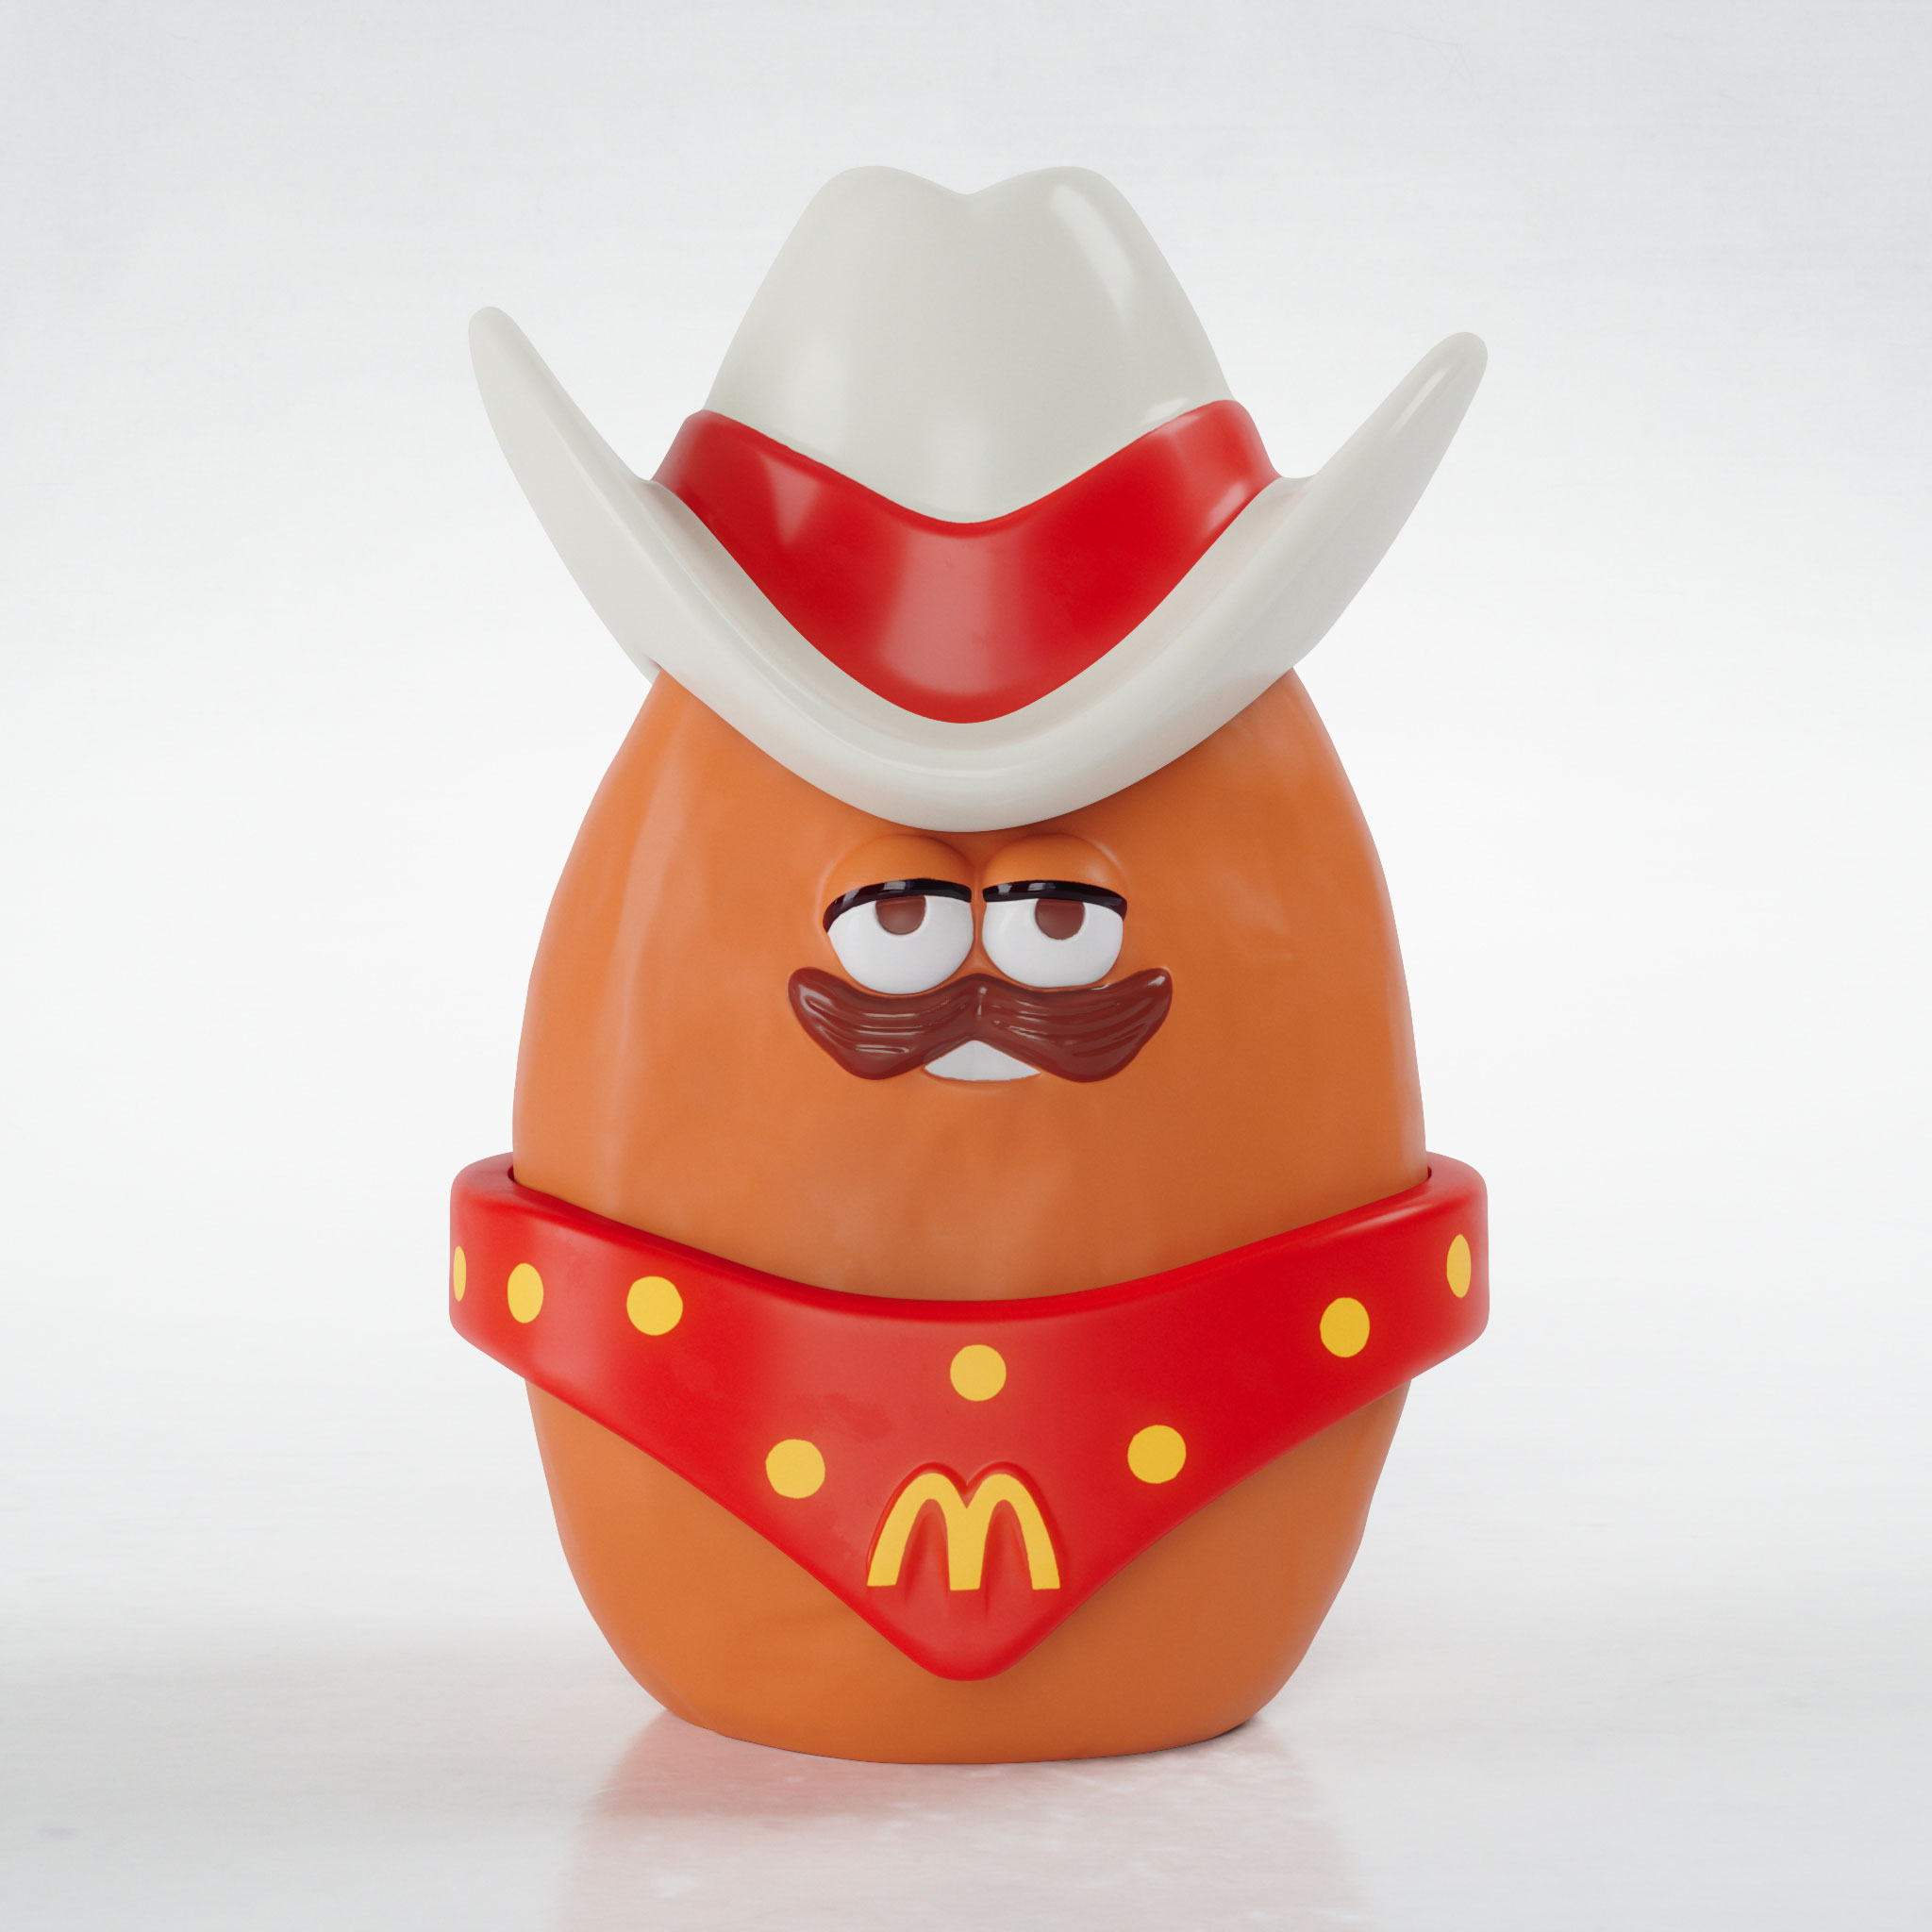 chicken nugget happy meal toy